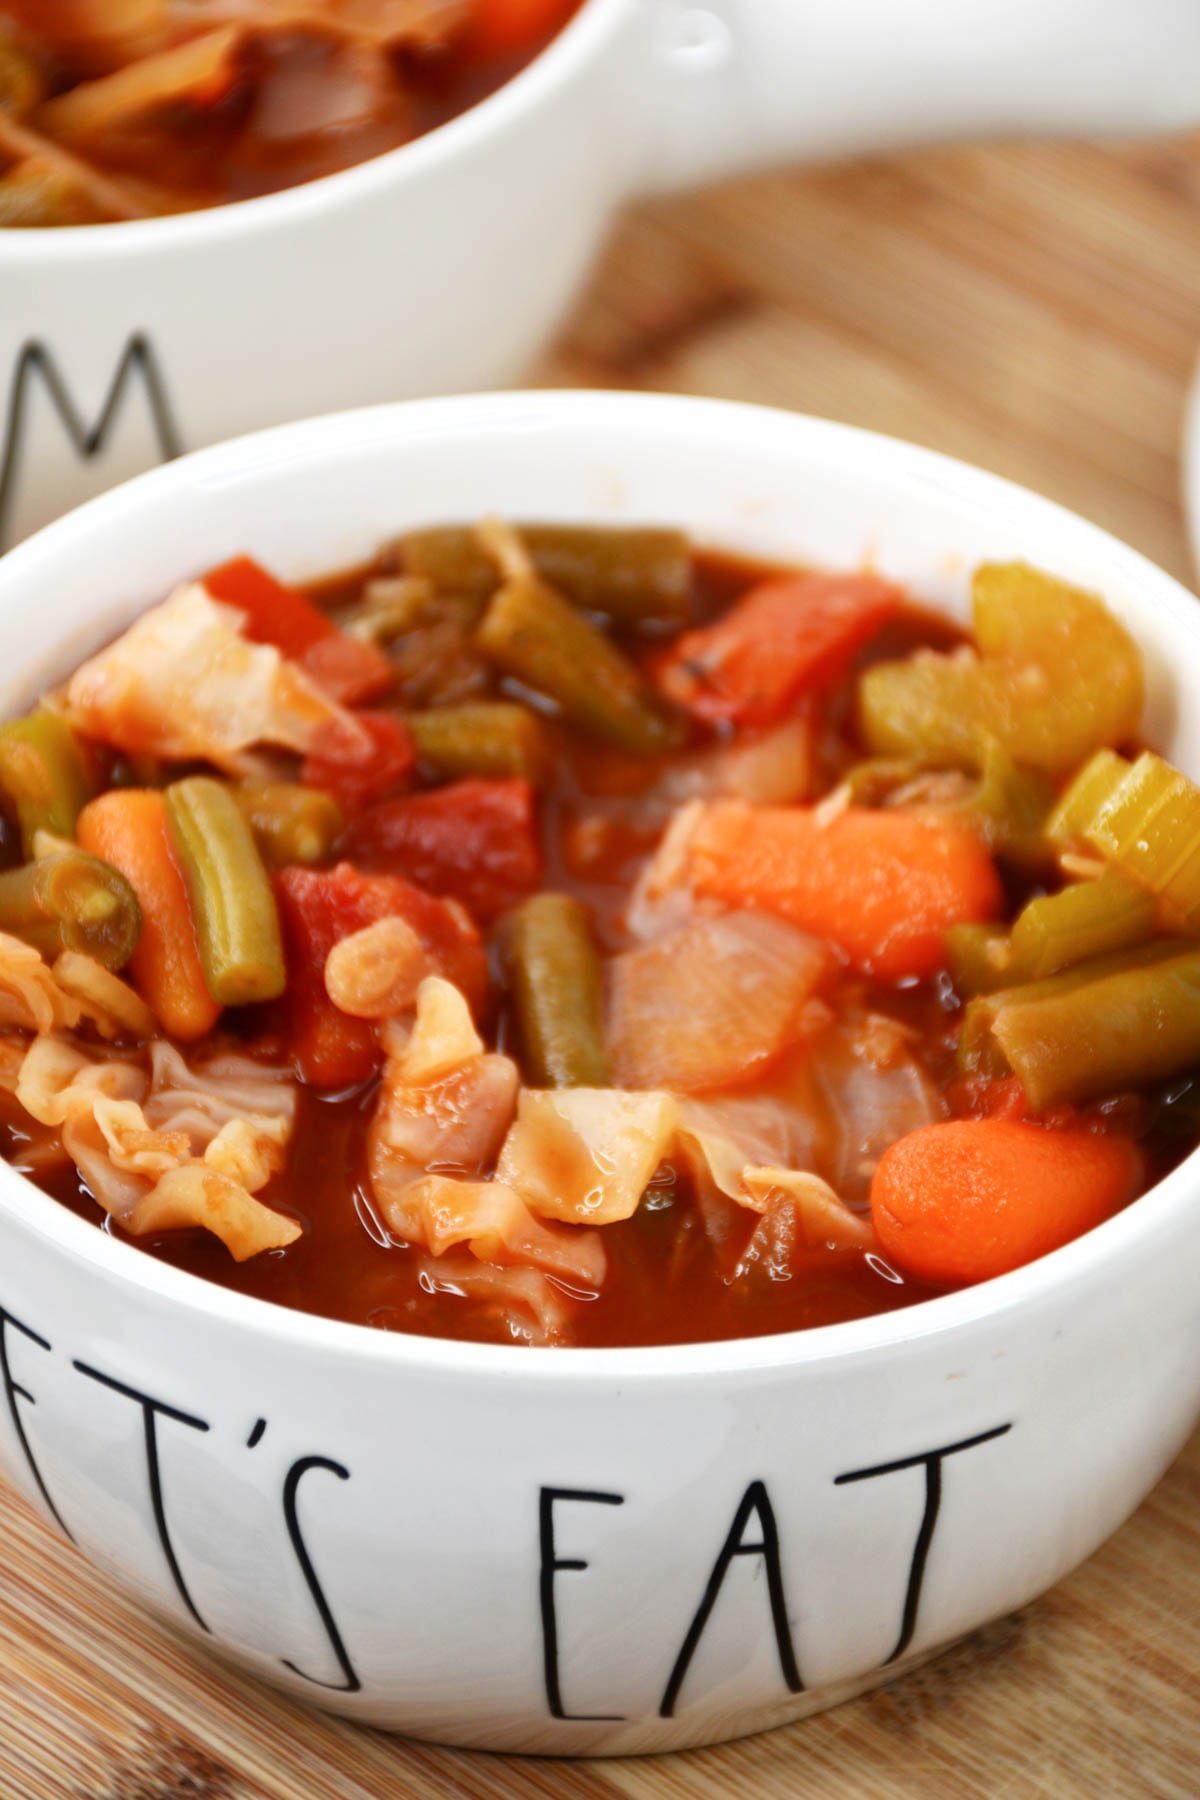 Cabbage Fat Burning Soup